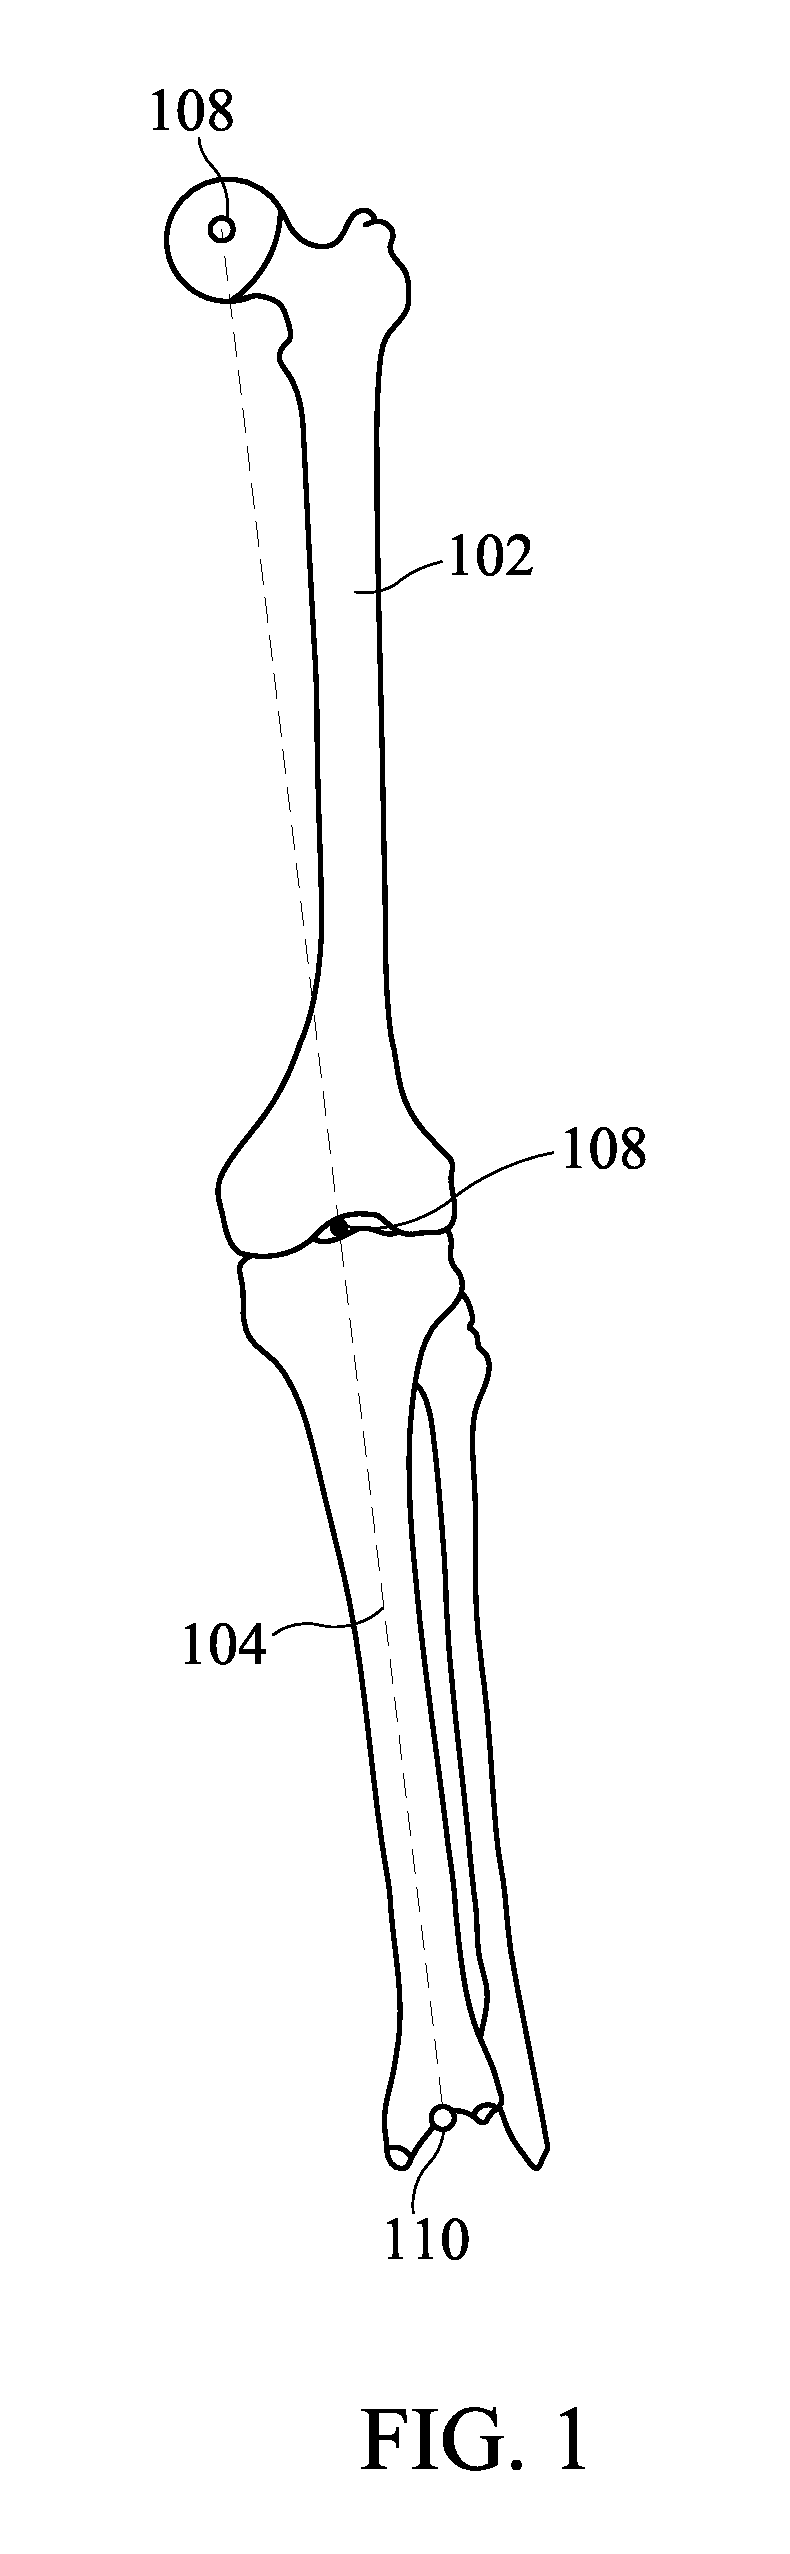 System and Method for Orthopedic Alignment and Measurement